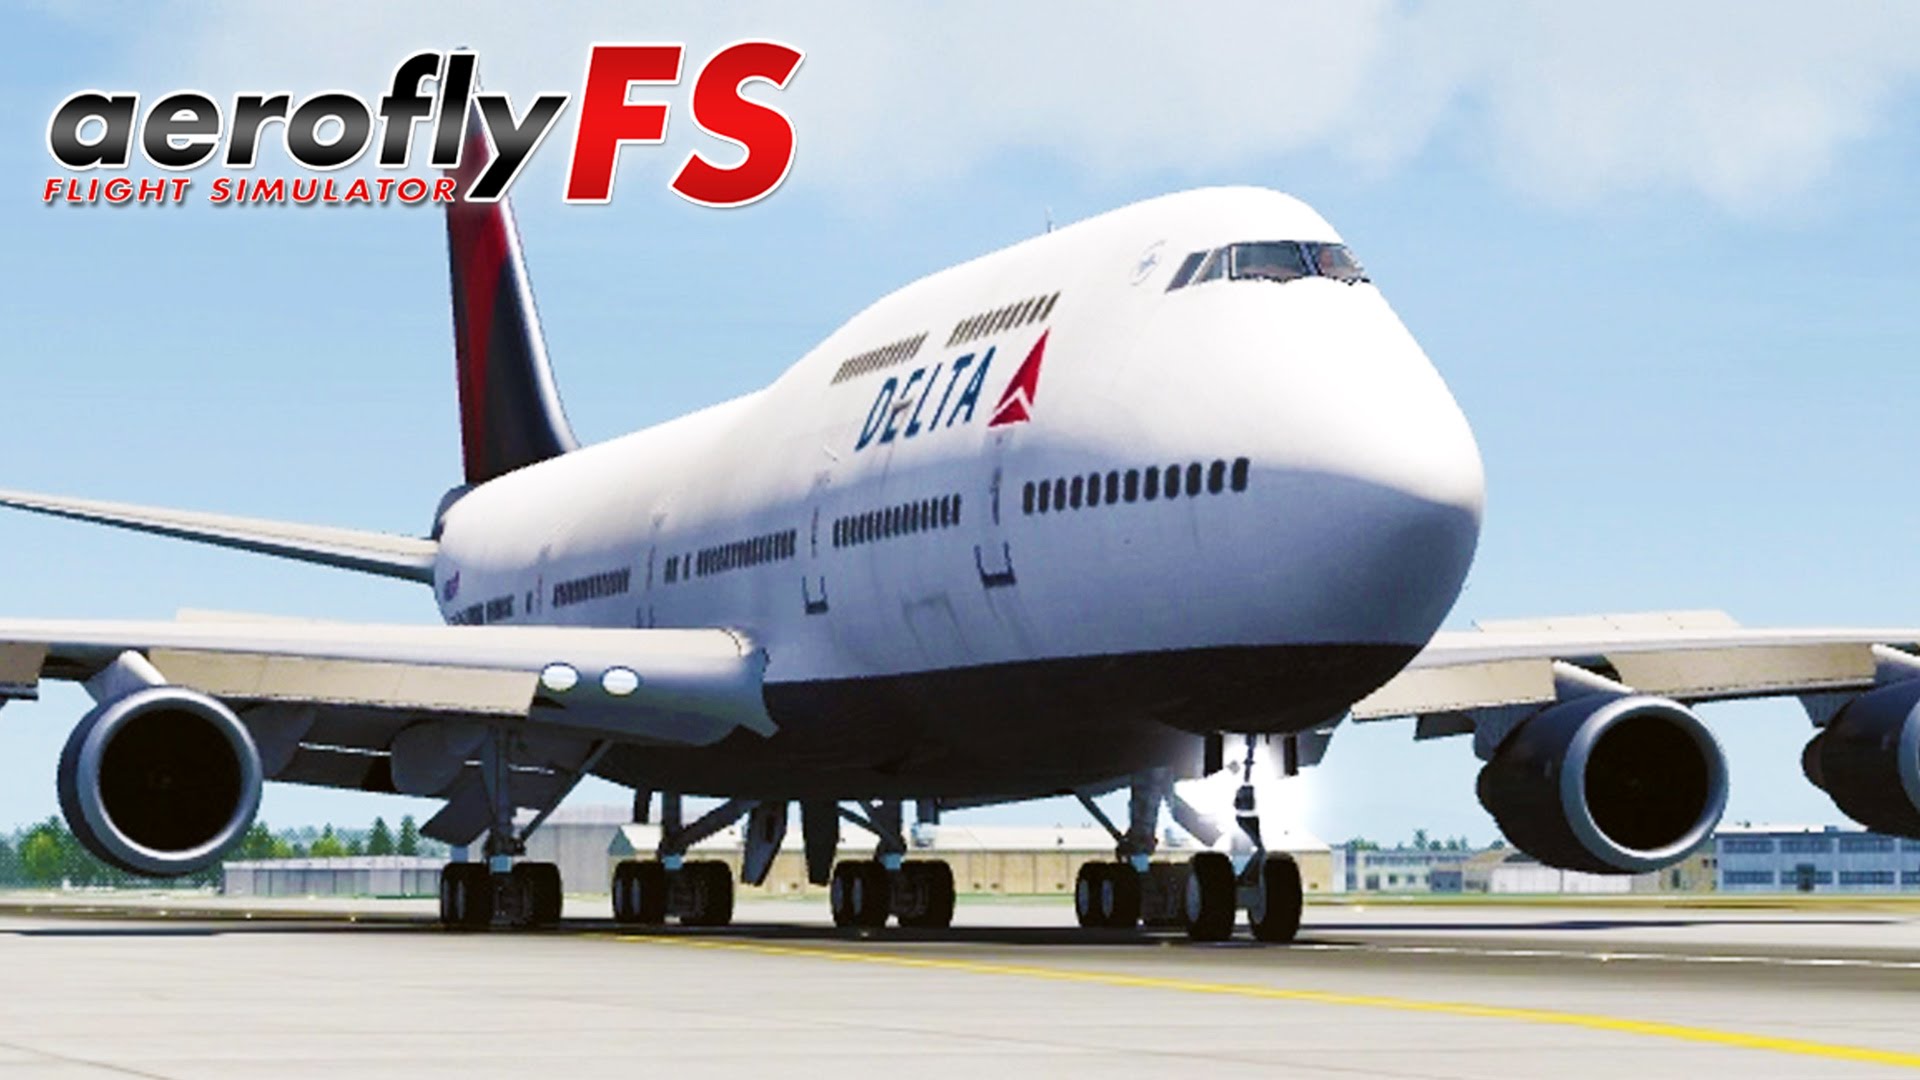 Aerofly fs 3 for pc